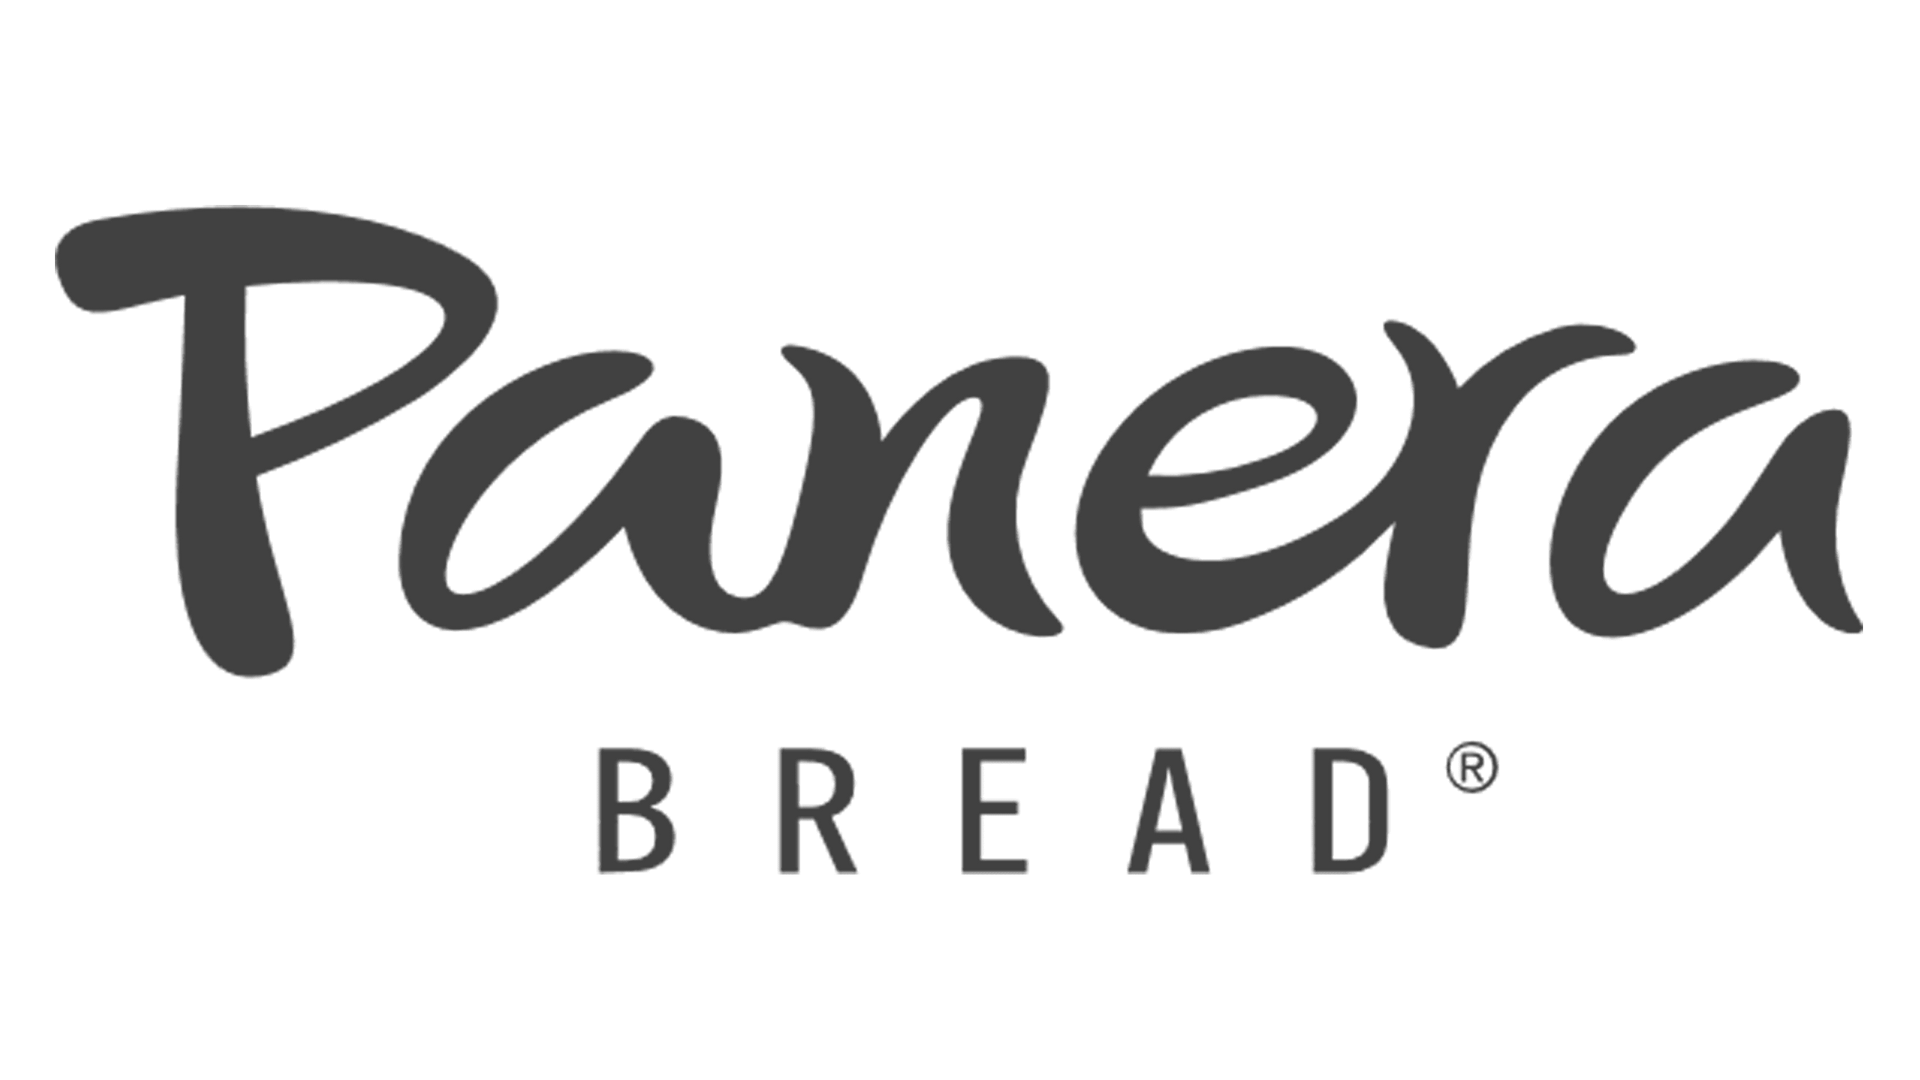 Lindner Properties in Mid-MO Works With Local & National Brands Like Panera Bread